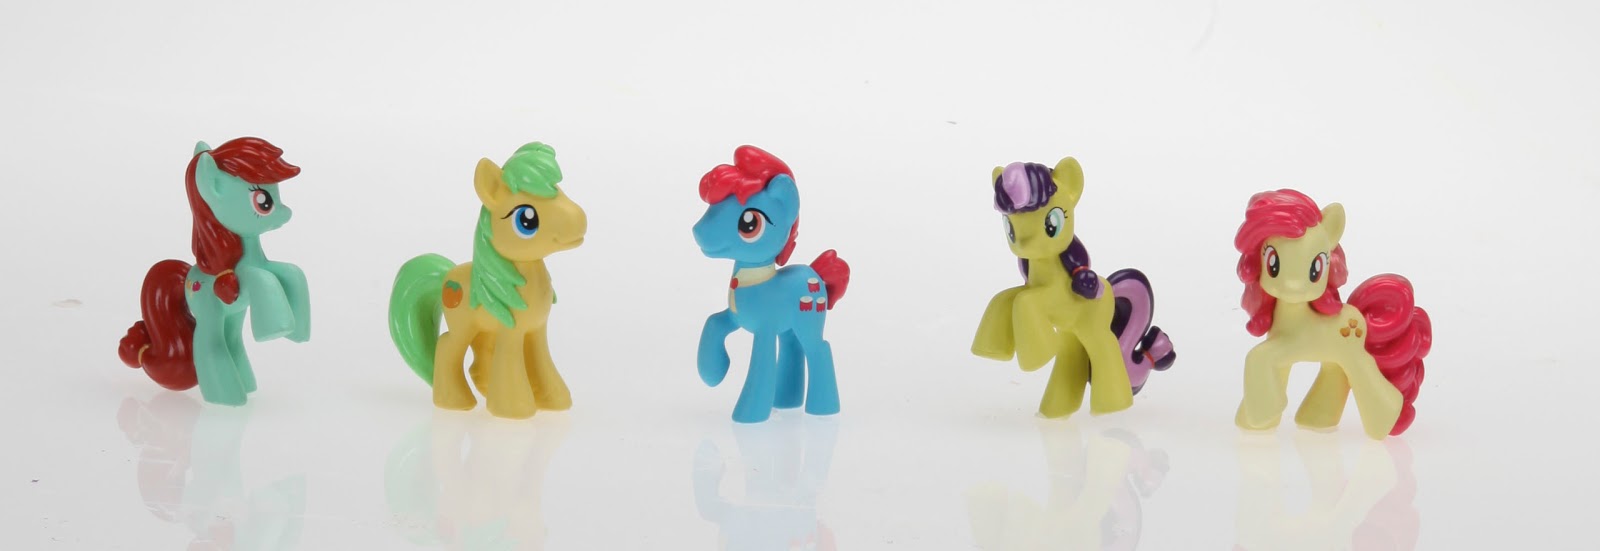 Blind Bag Wave 13 Chase Figures of Candy Apples, Mosely Orange, Apple Bottoms, Lavender Fritter and Apple Bumpkin